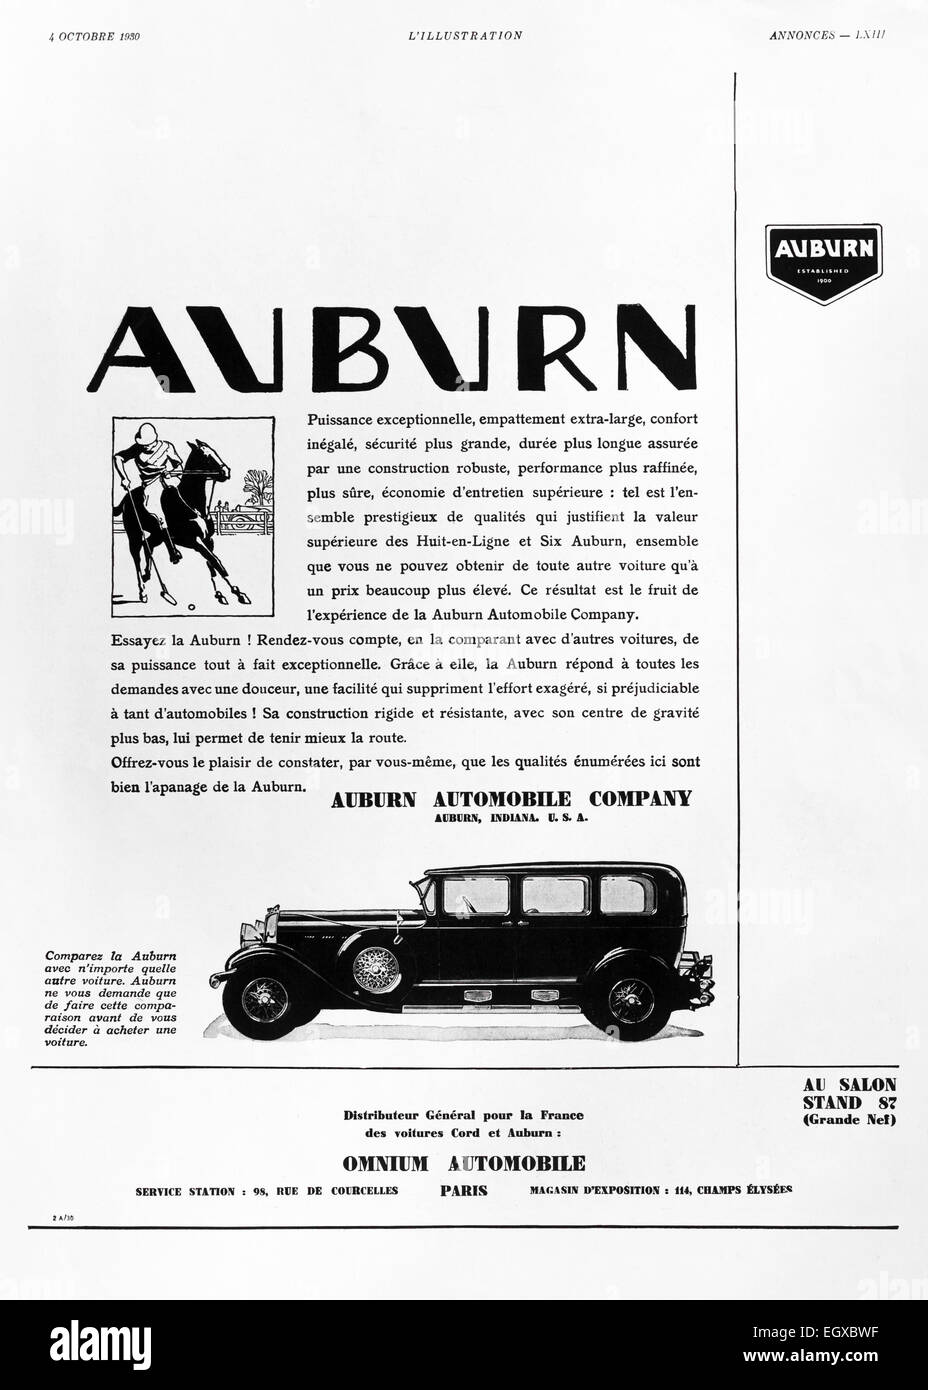 1930 advert for “Auburn” car from French “L’Illustration” magazine. Stock Photo